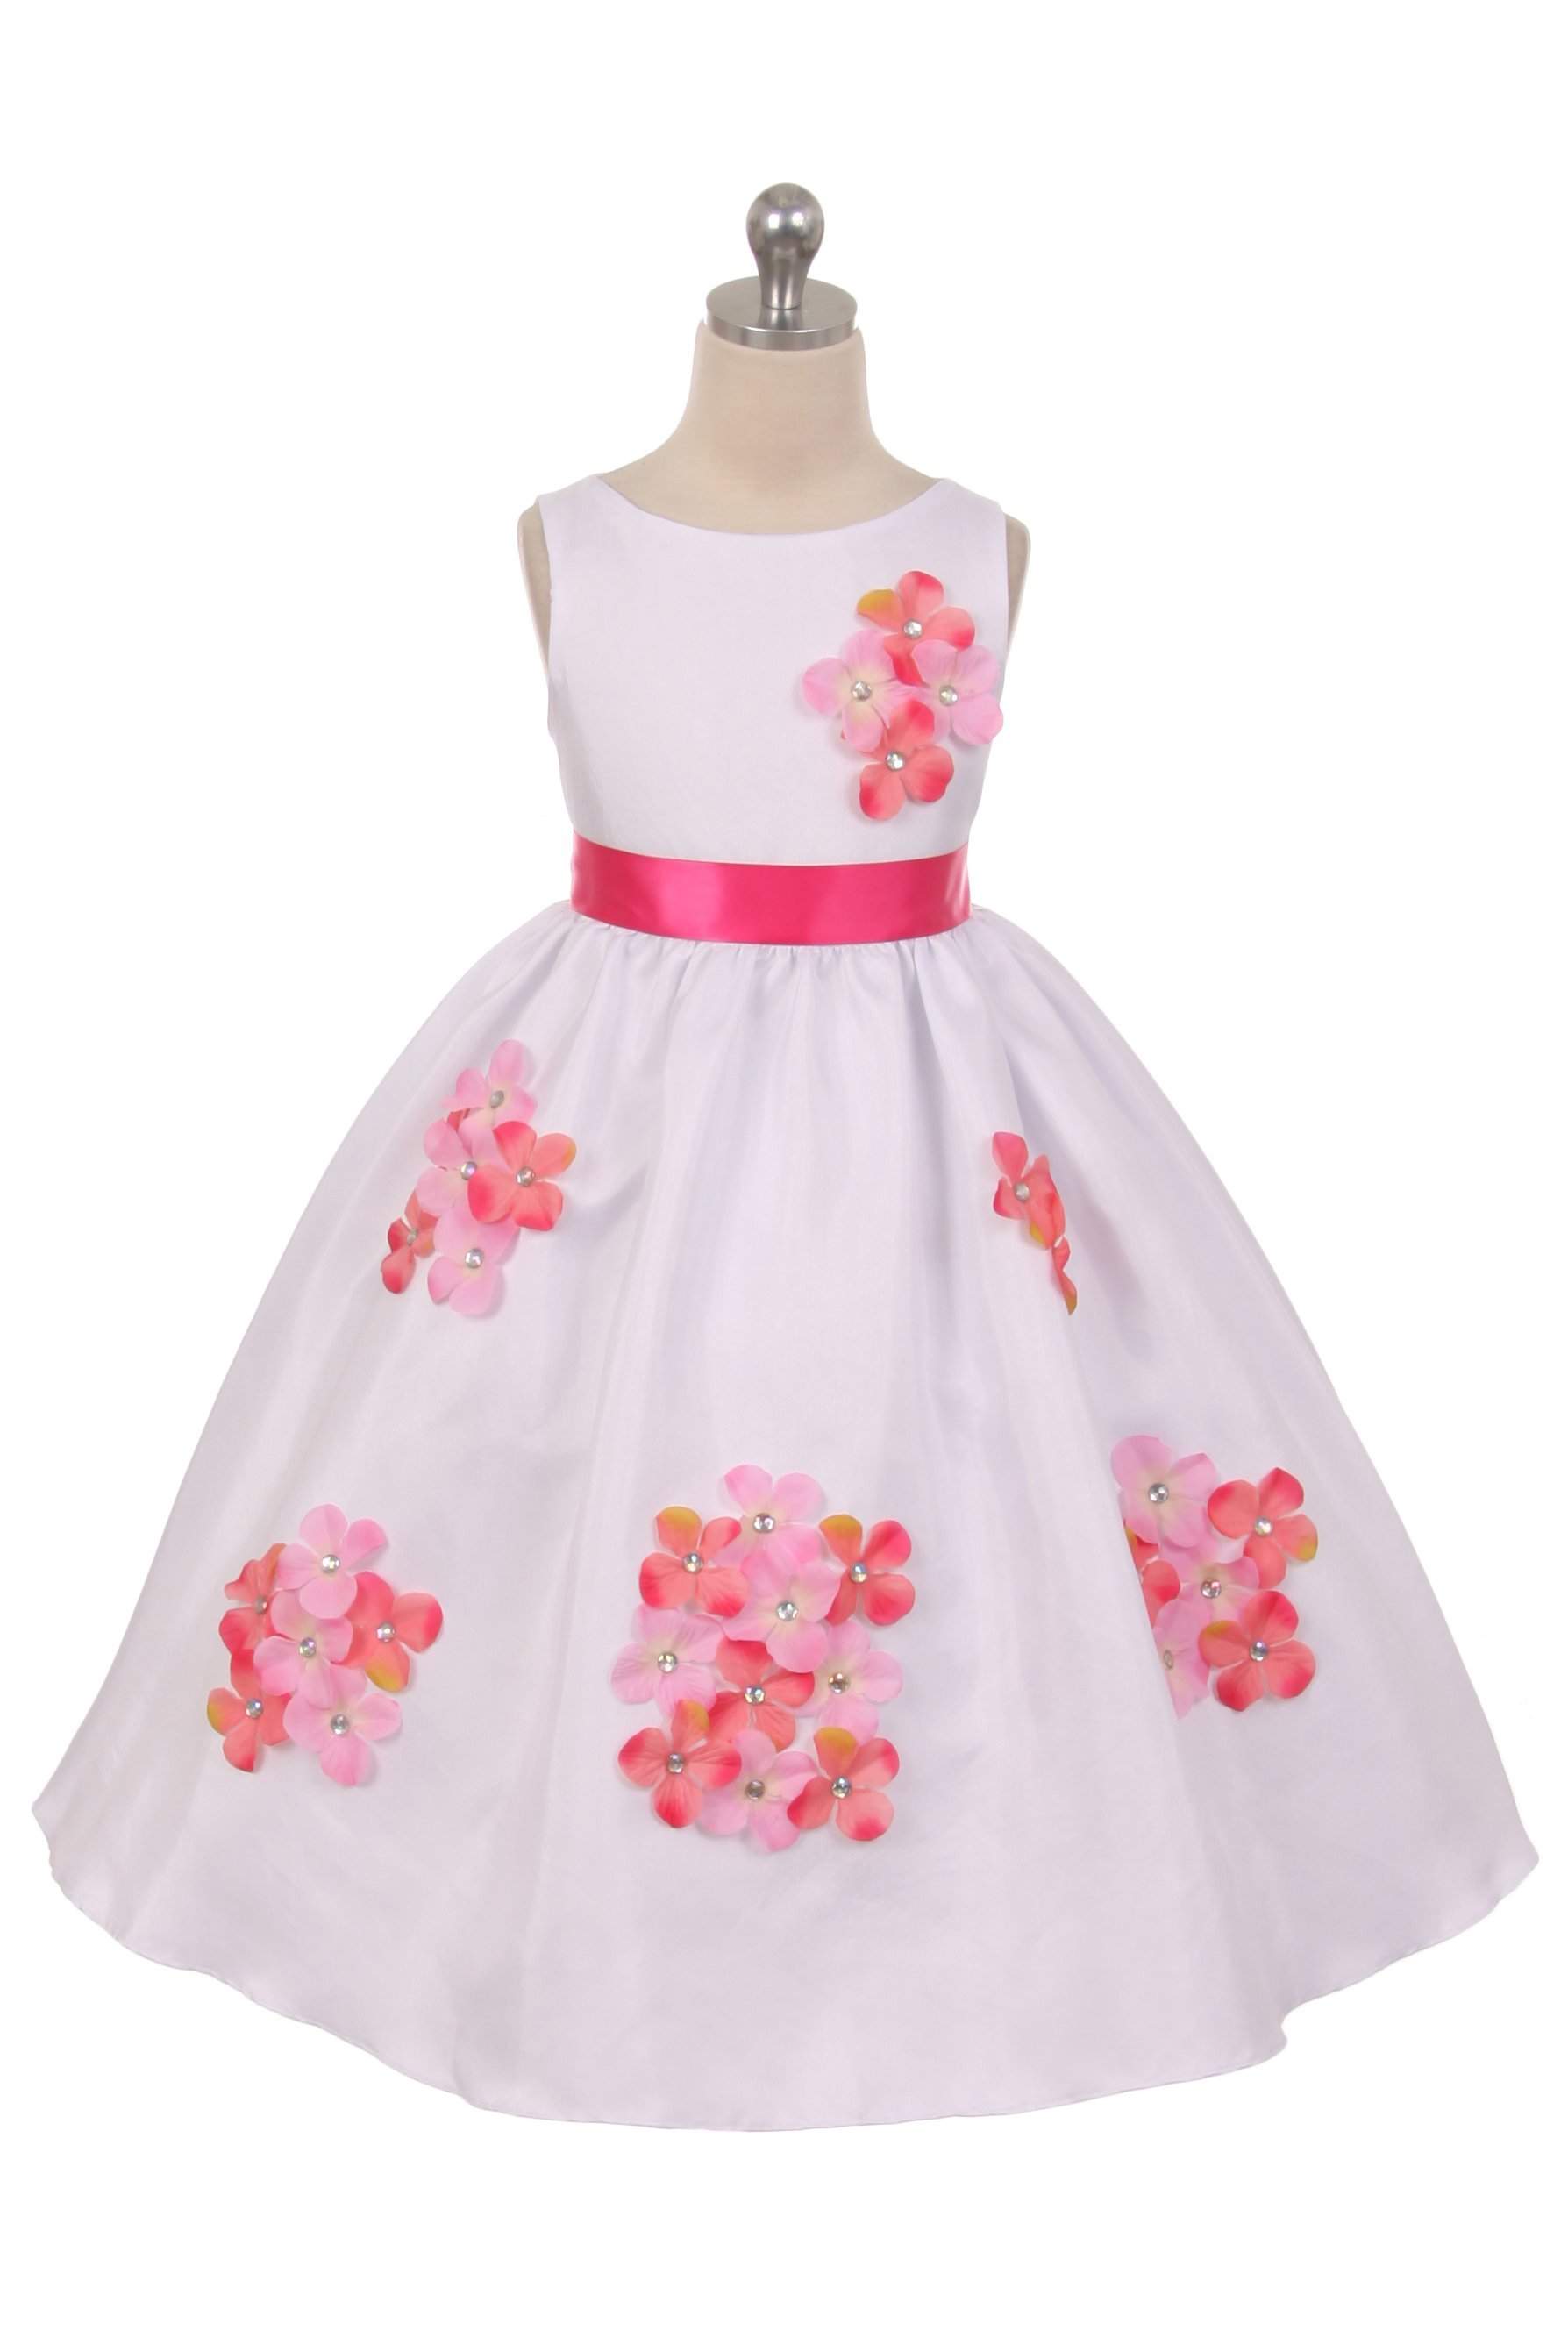 Shantung Dress Decorated with Flower Petals 2-14-Kid's Dream-1_2,3_4,5_6,7_8,big_girl,color_Blue,girl-dress,length_Tea Length,little_girl,meta-related-collection-shop-the-outfit-girls,Pink-collection,size_02,size_04,size_06,size_08,size_10,size_12,size_14